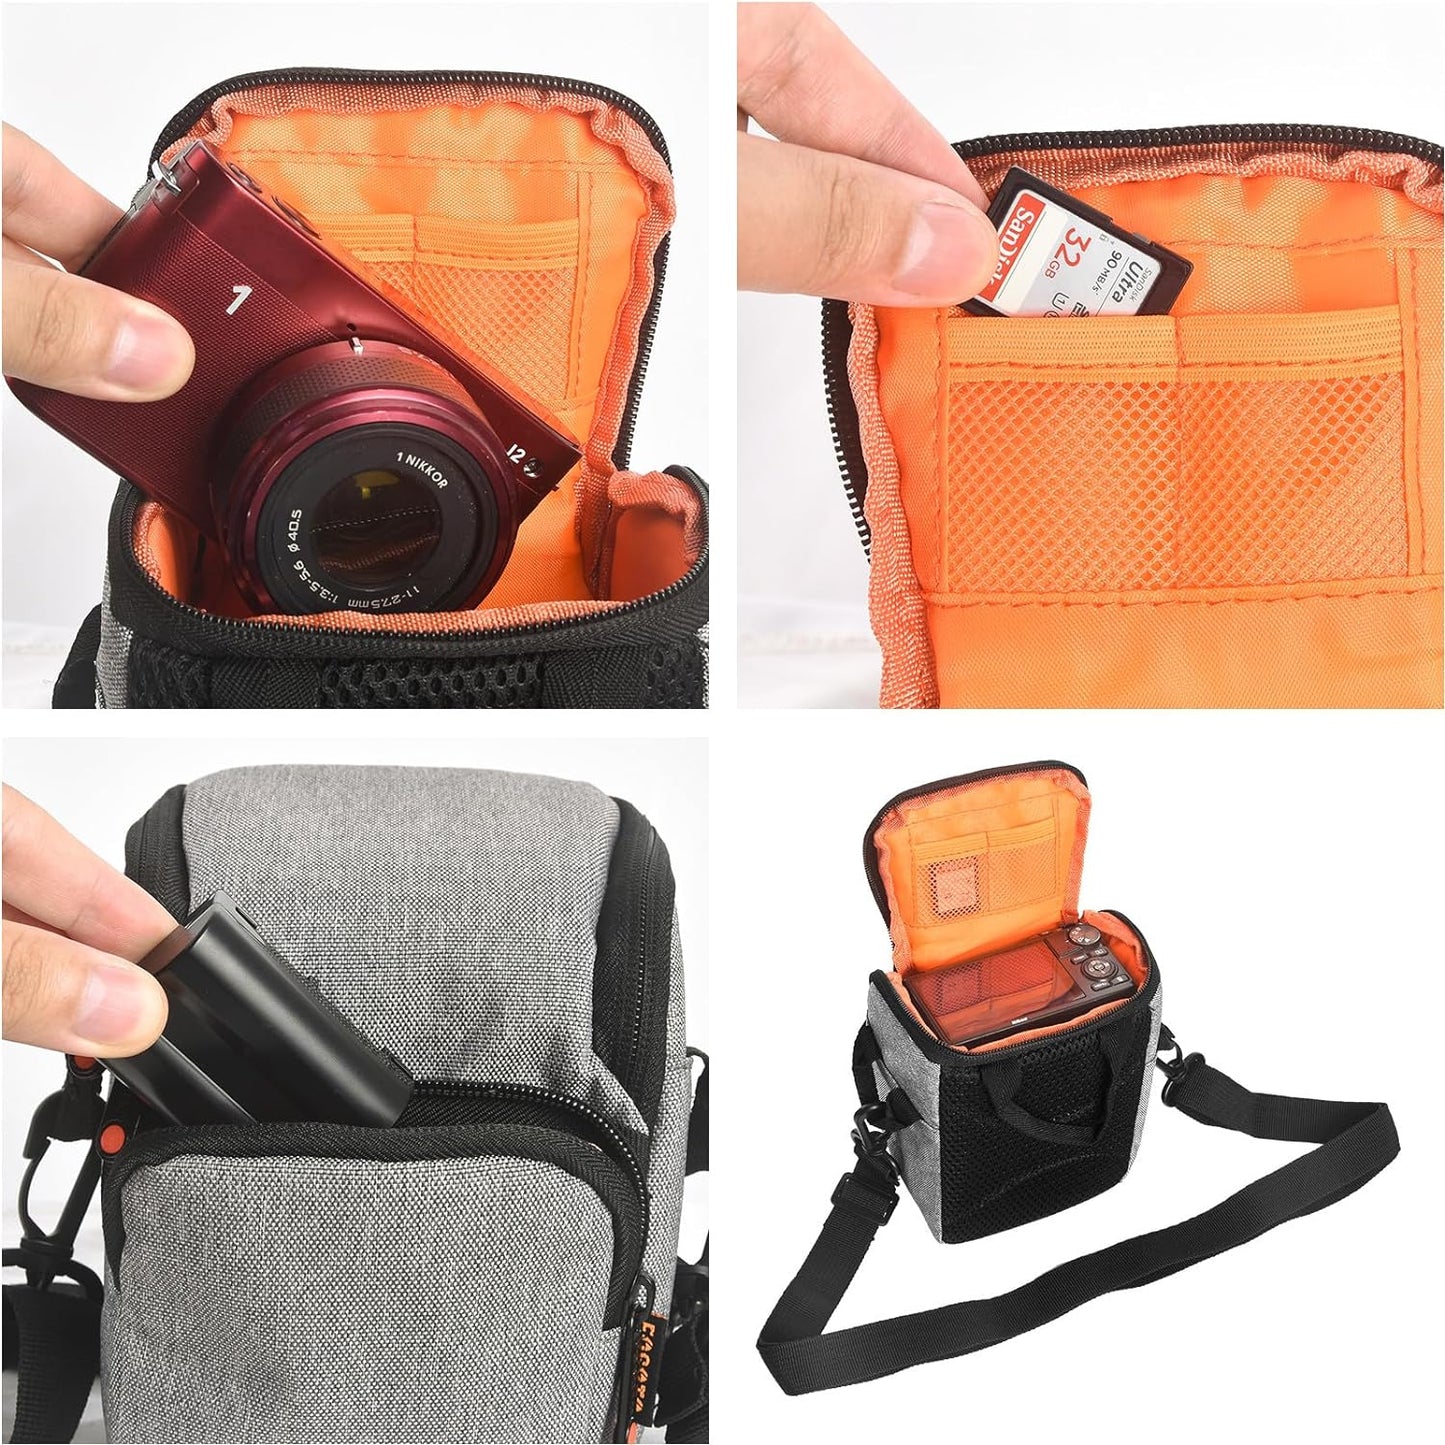 FOSOTO Camera Case Bag Compatible for Nikon L340 L330 B500 L840,Canon SX420 SX720 SX620 G7X, Sony A6000 A6300 a5100 NEX-6 W830 RX100 RX0M2,Panasonic GX85 ZS60 Long Zoom or Compact Syste